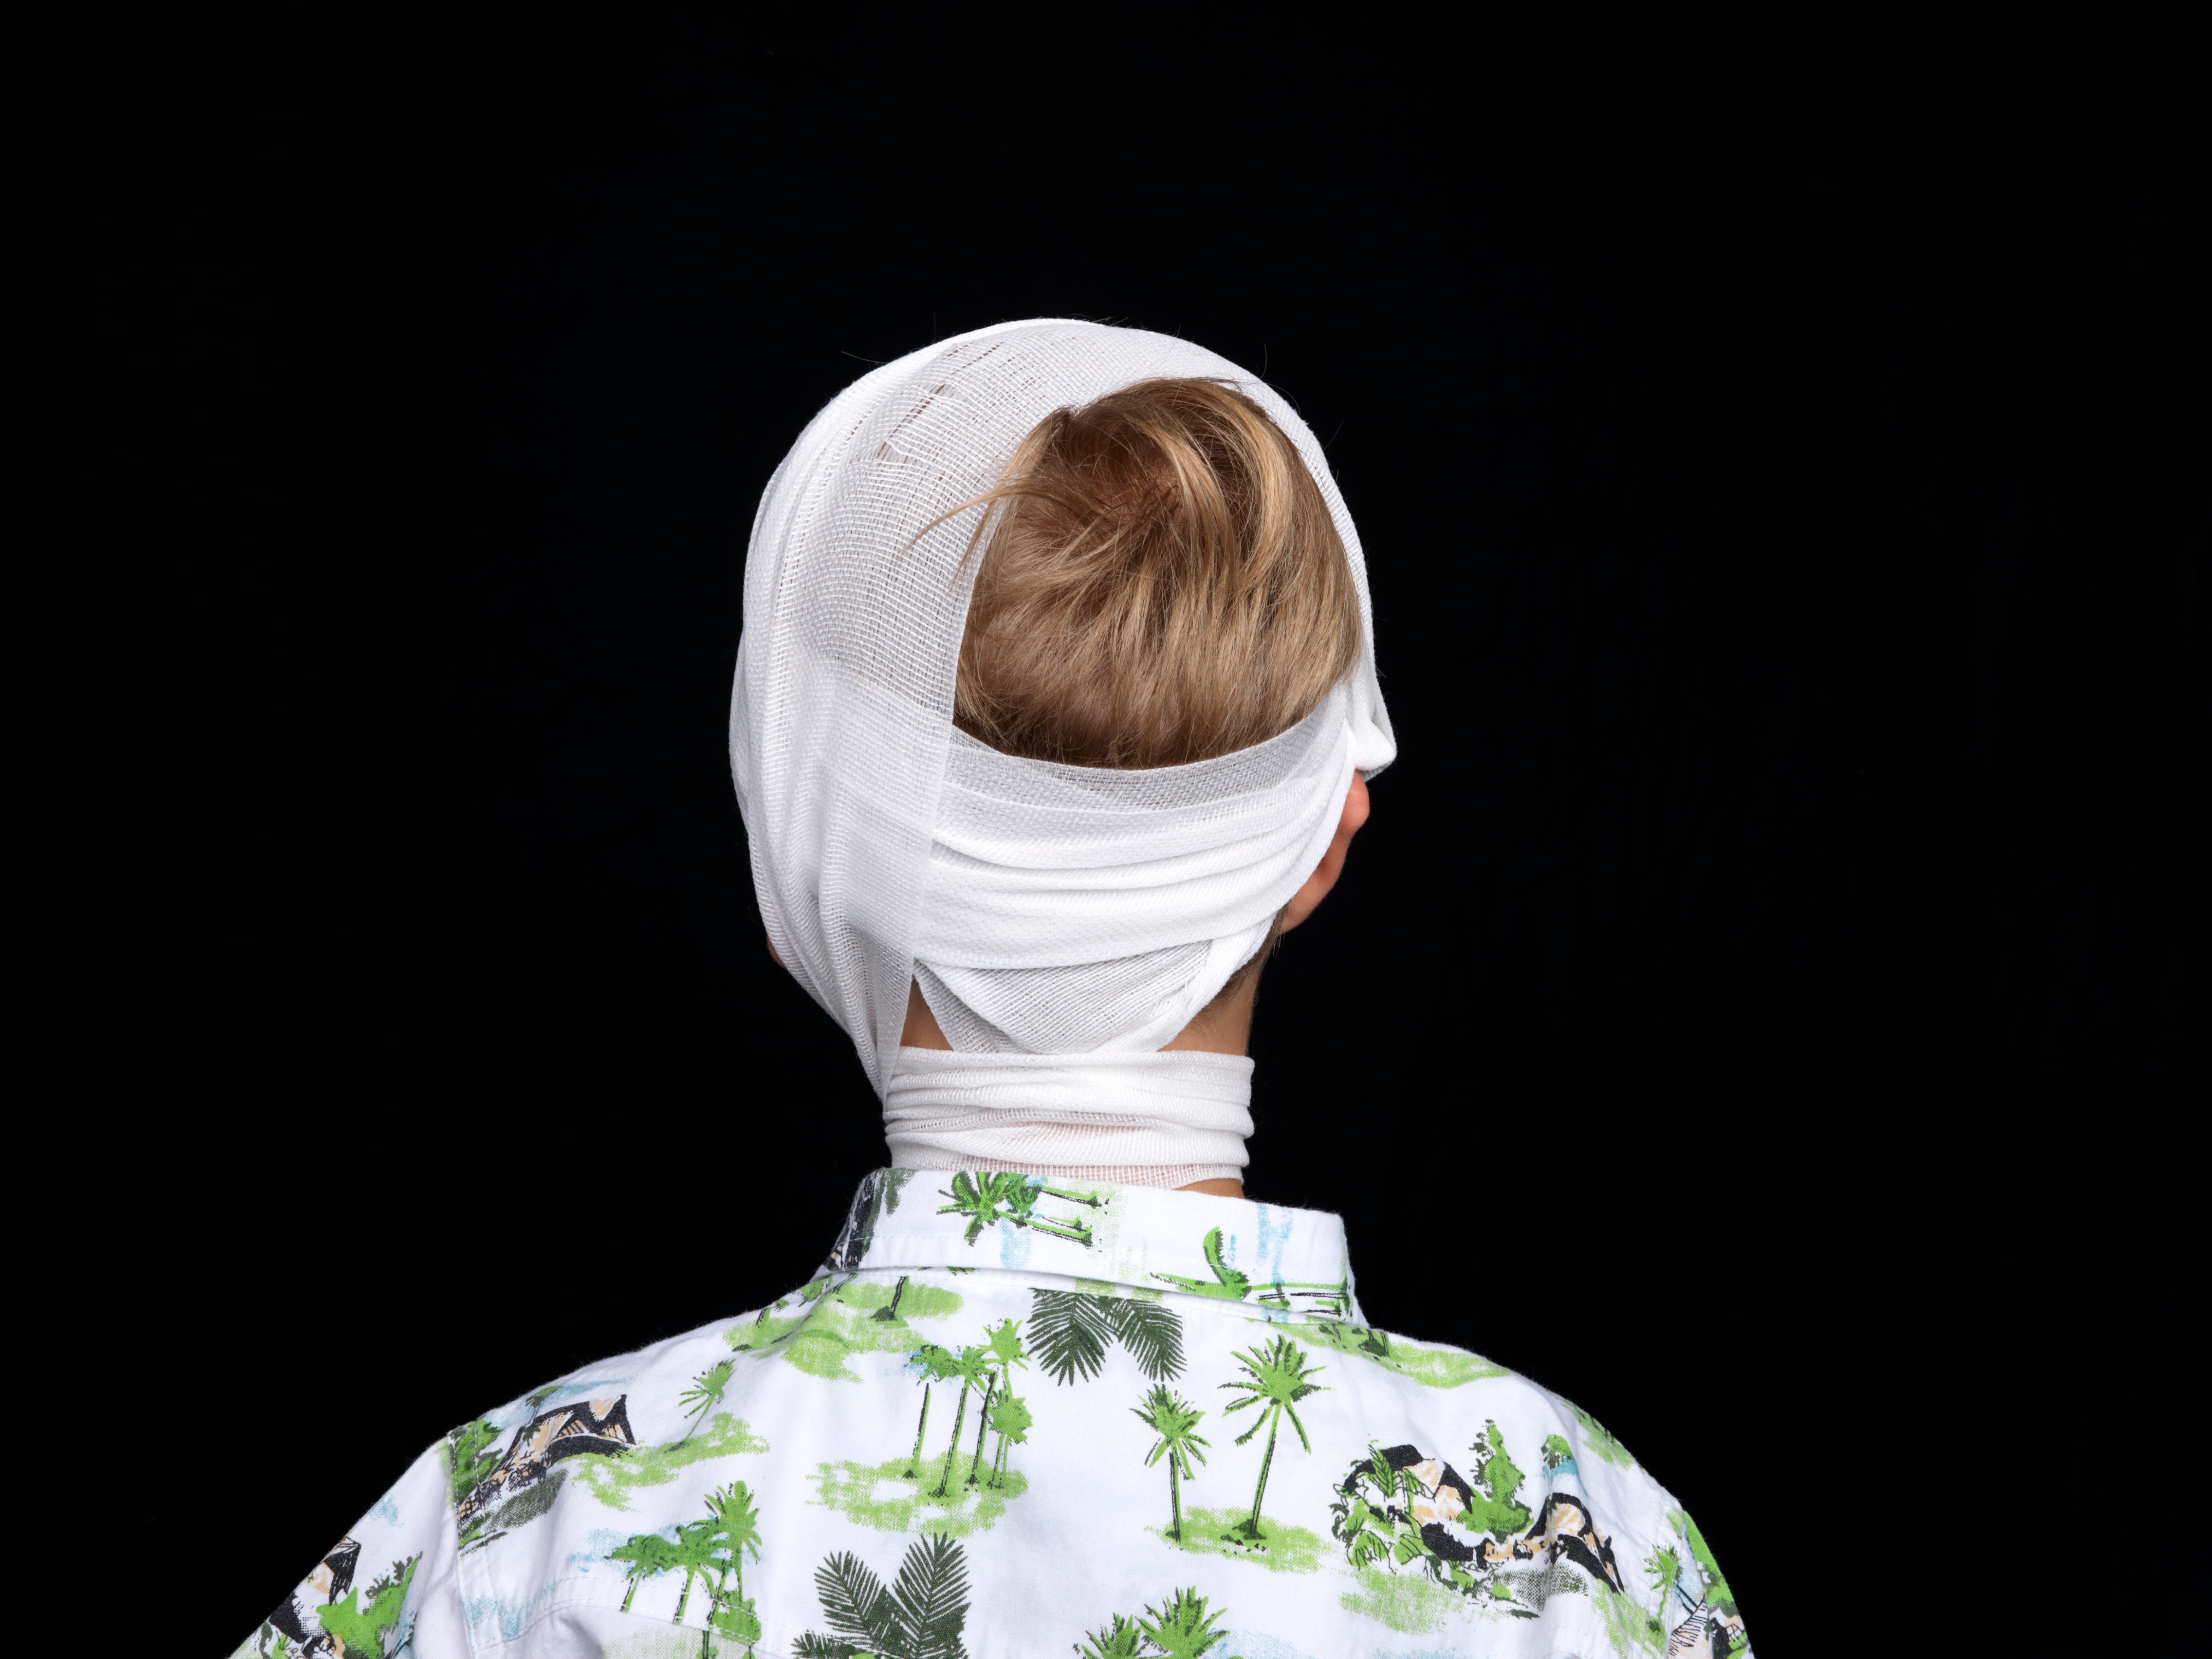 Young boy in head bandage